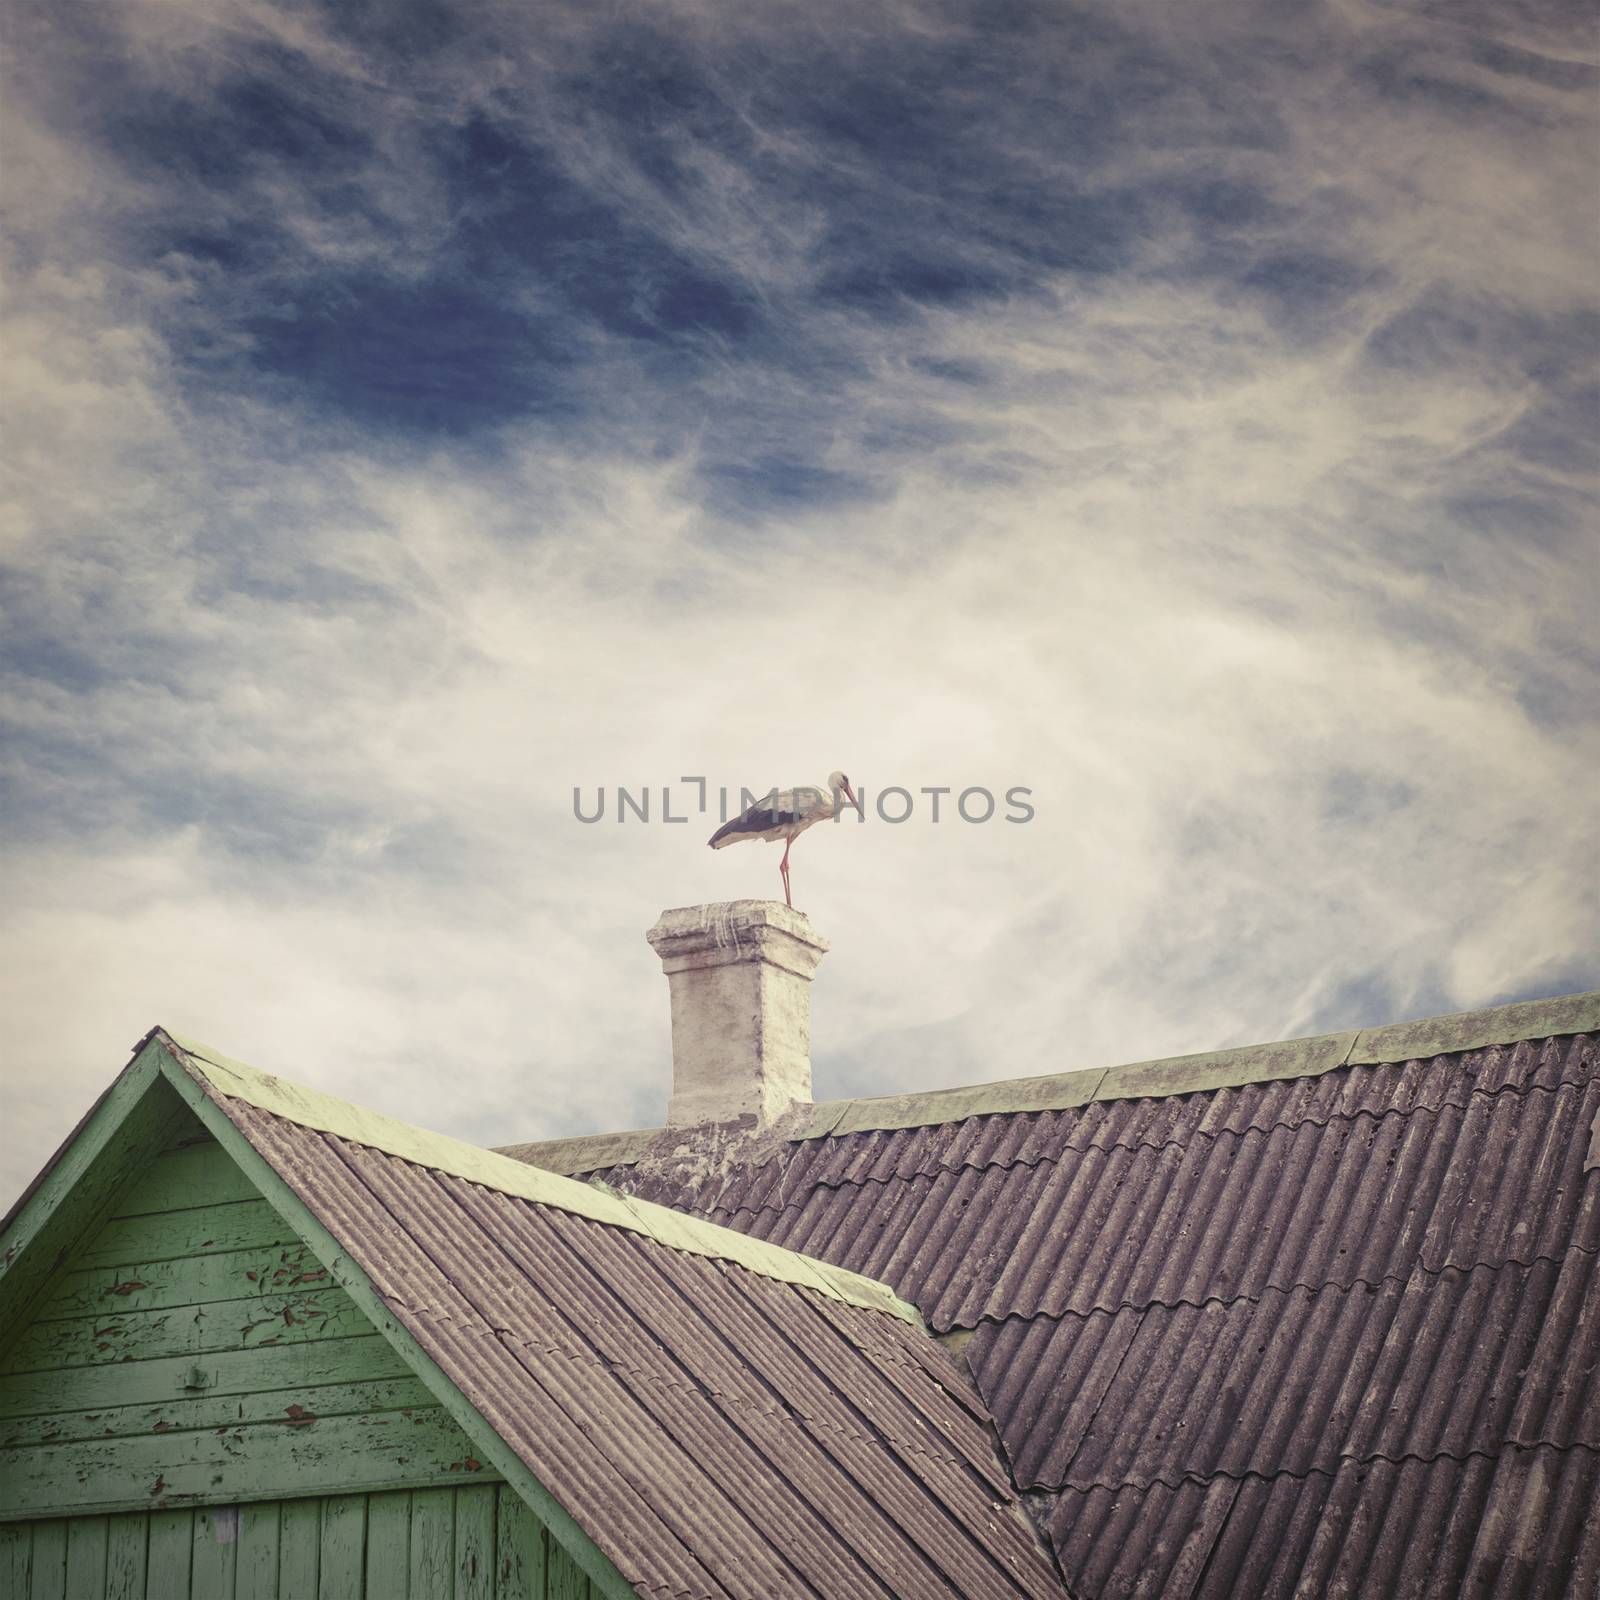 Stork standing on a chimney of old house with a tiled roof, dramatic blue sky background